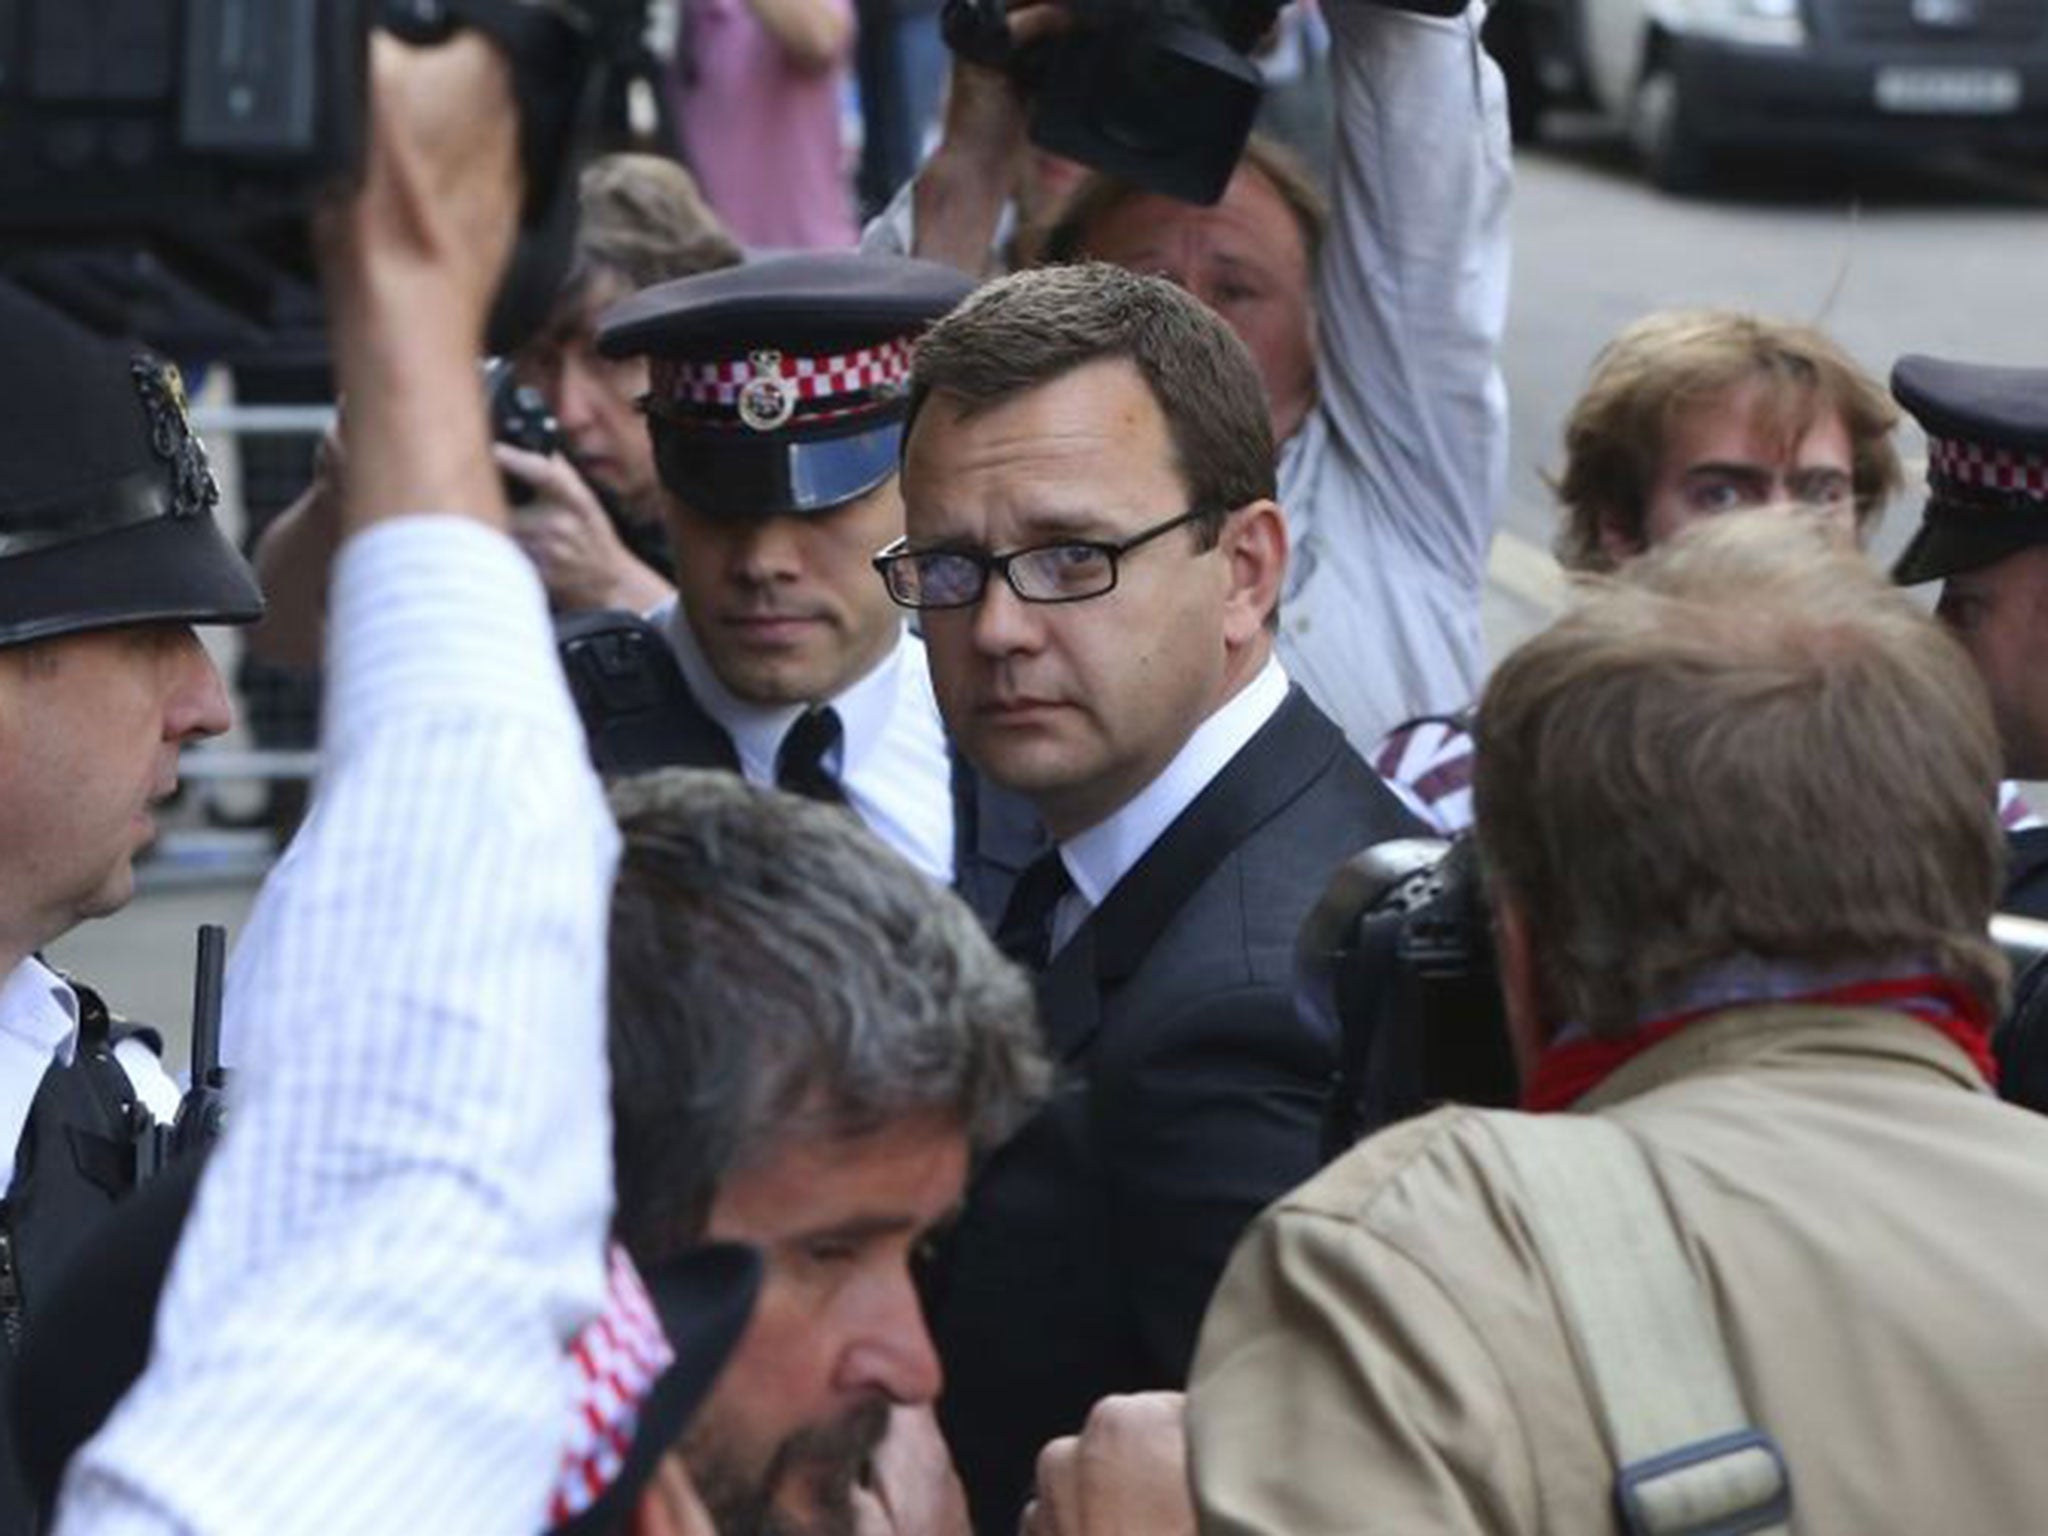 Andy Coulson is accused of lying under oath, which he deniea